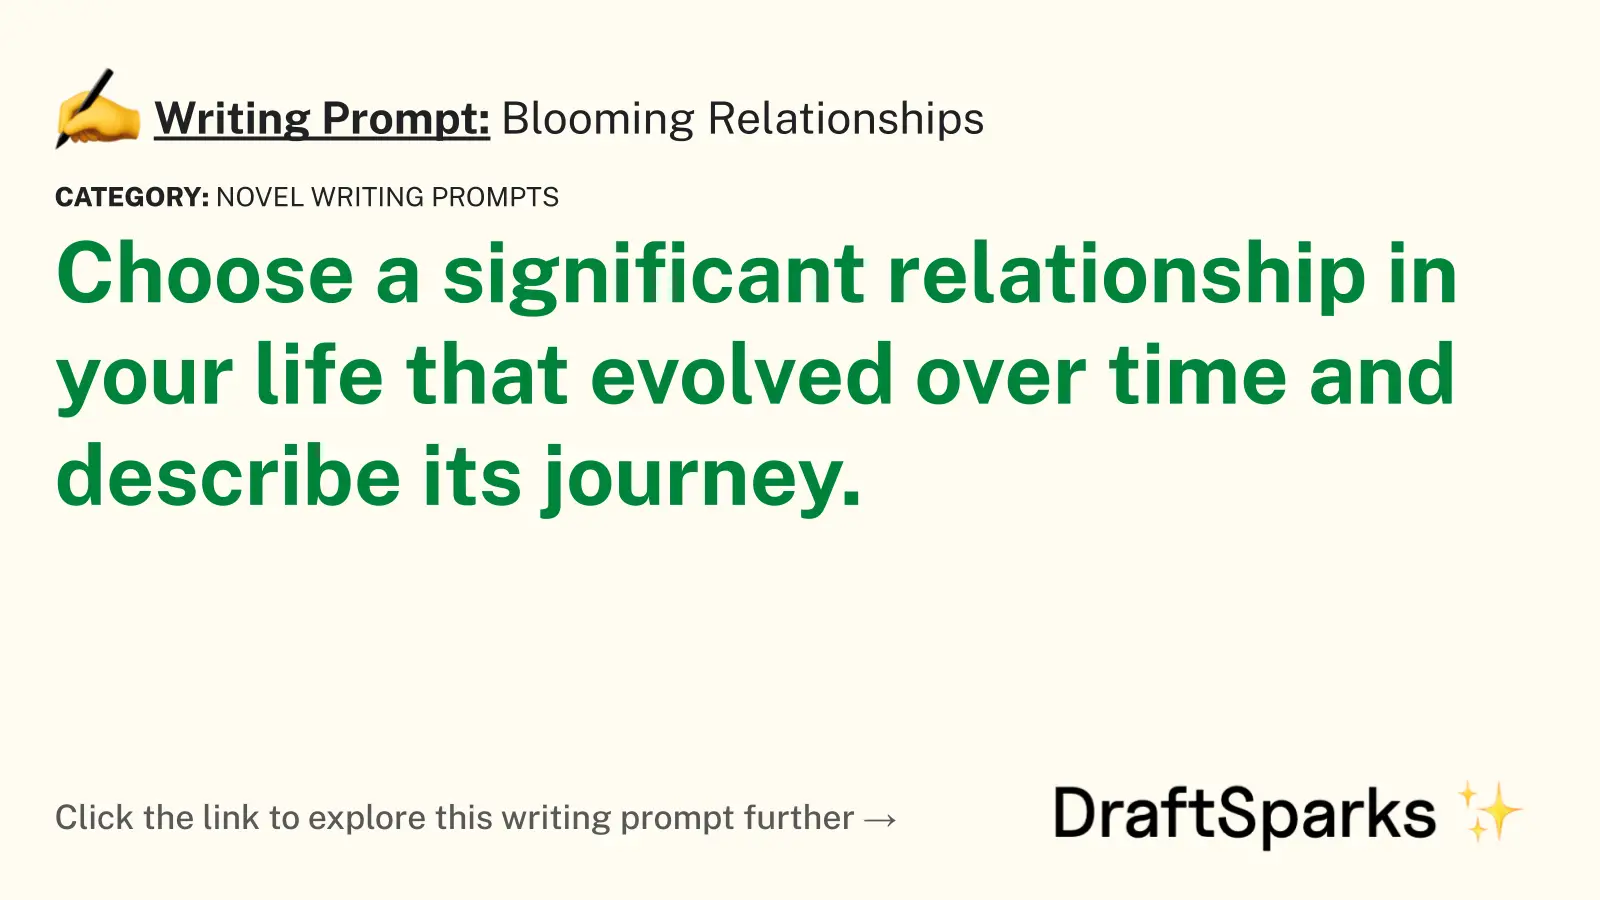 Blooming Relationships